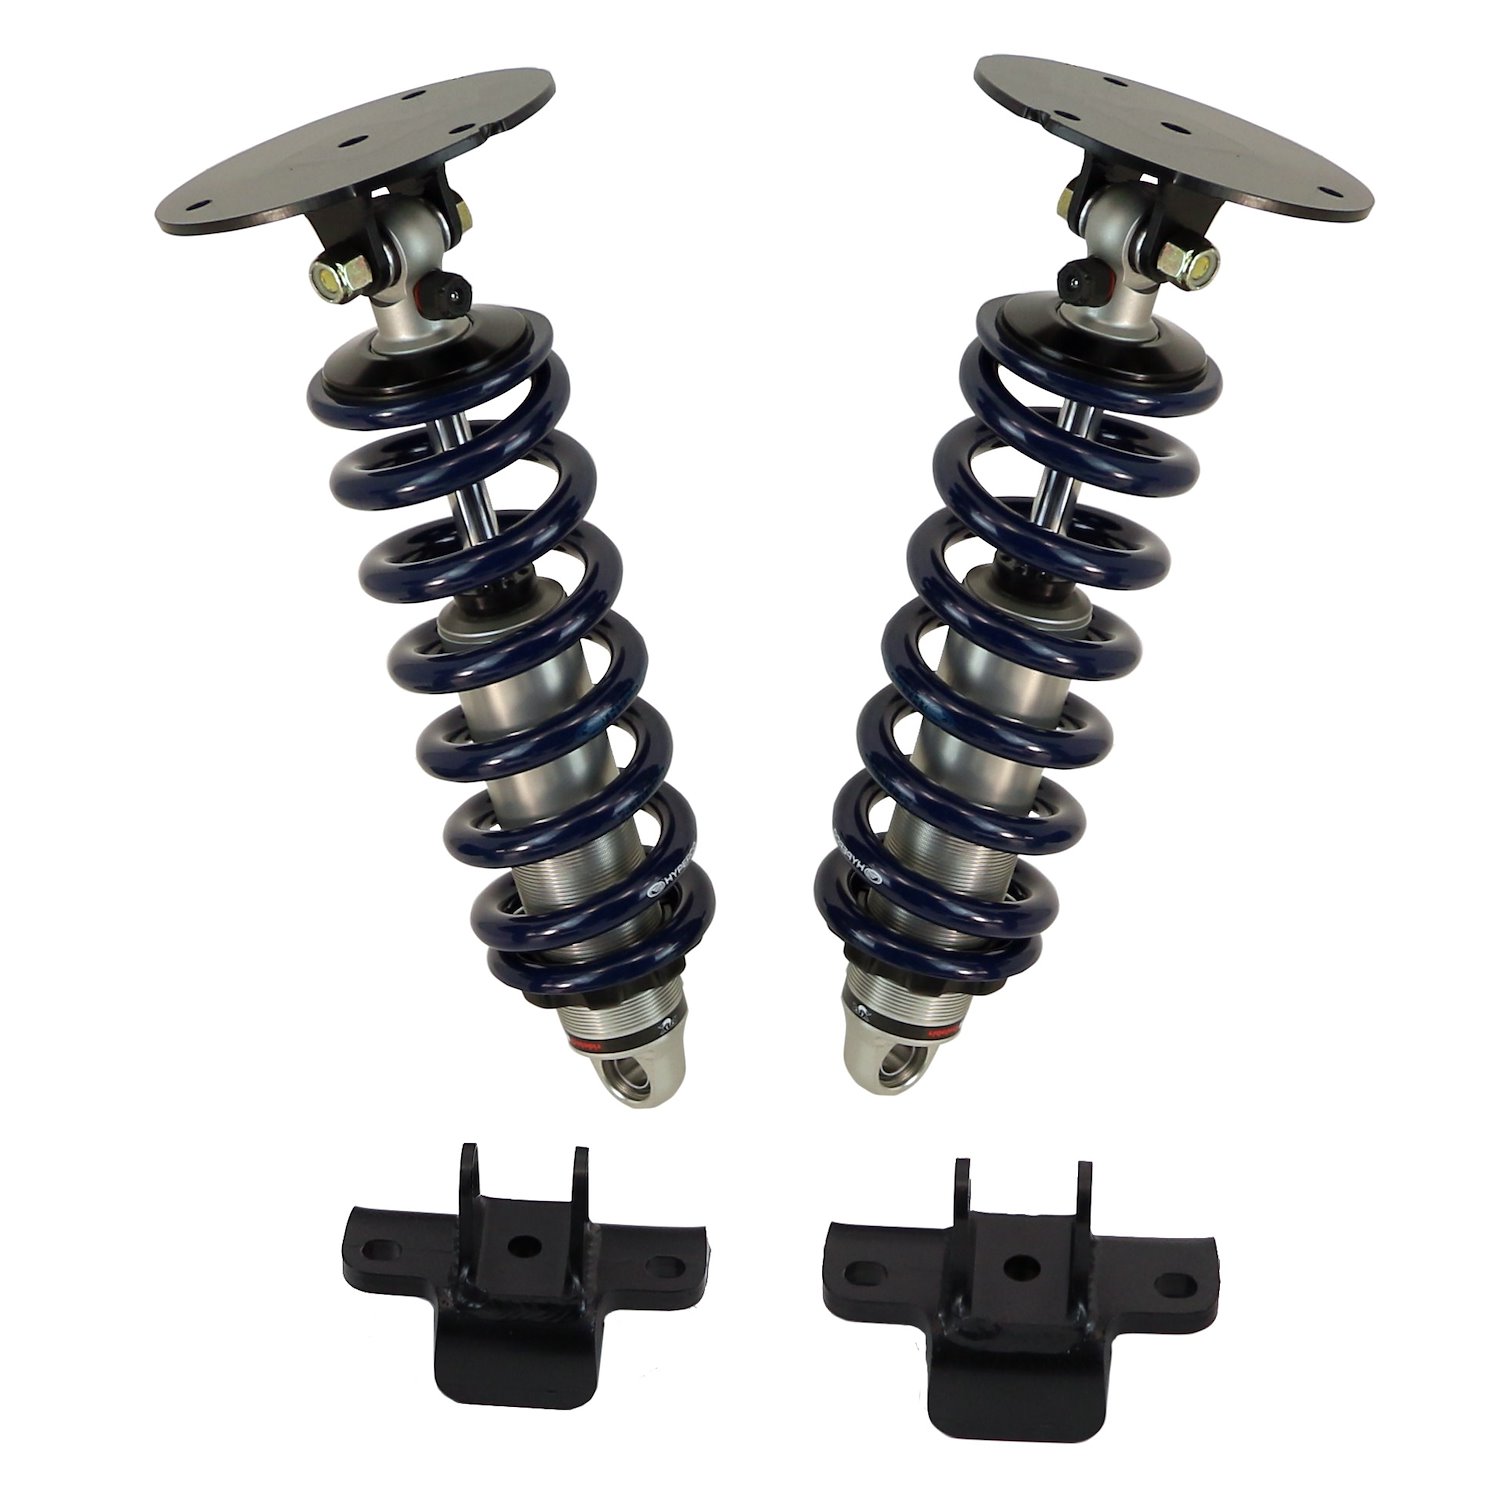 HQ Series Single-Adjustable Front Coil-Over Shocks 2007-2013 Chevy Silverado/GMC Sierra 1500 Truck 2WD